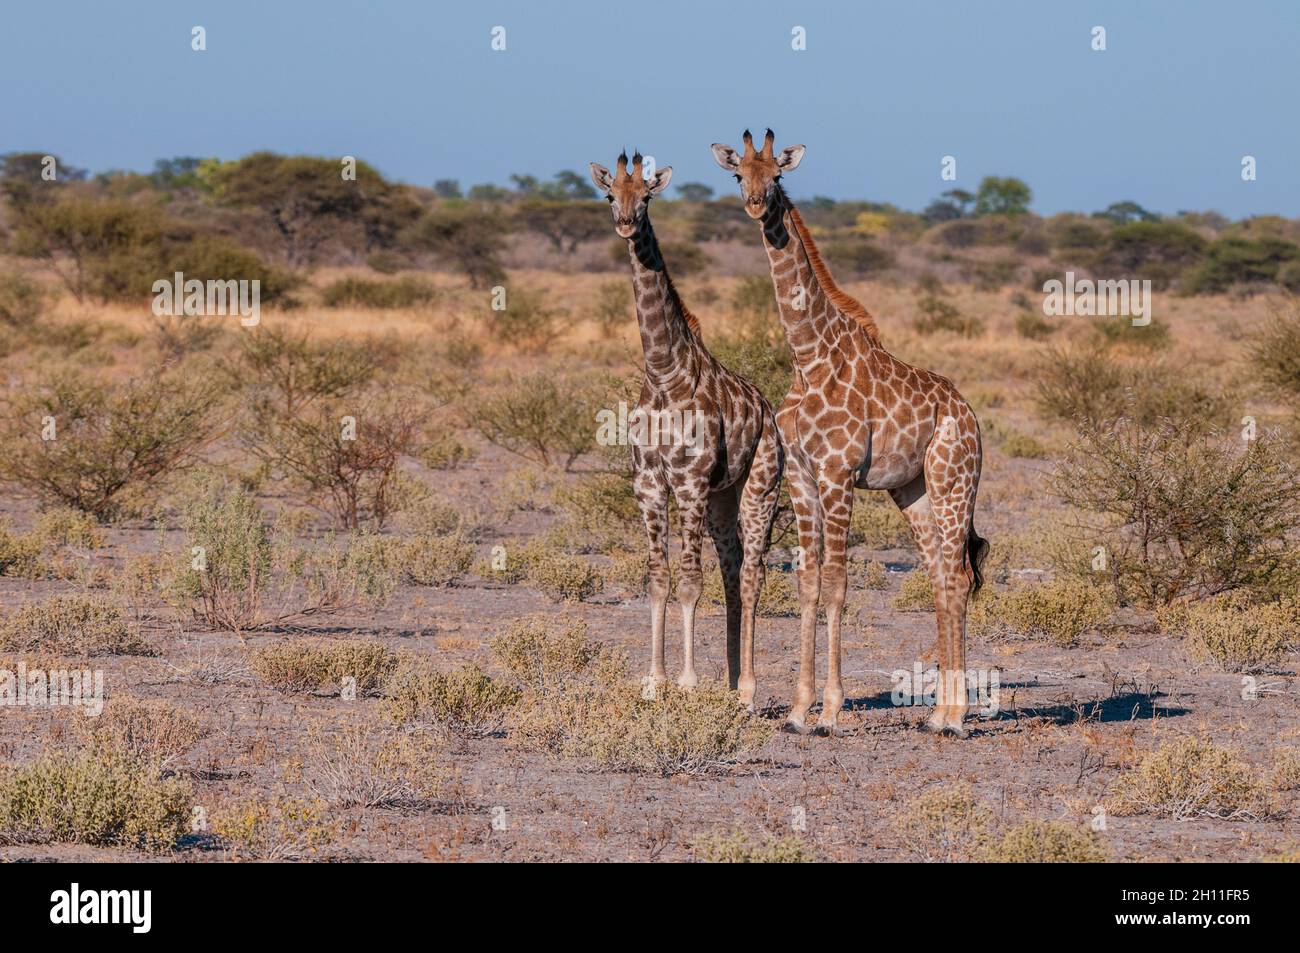 A portrait of two southern giraffes, Giraffa camelopardalis, looking at the camera. Central Kalahari Game Reserve, Botswana. Stock Photo